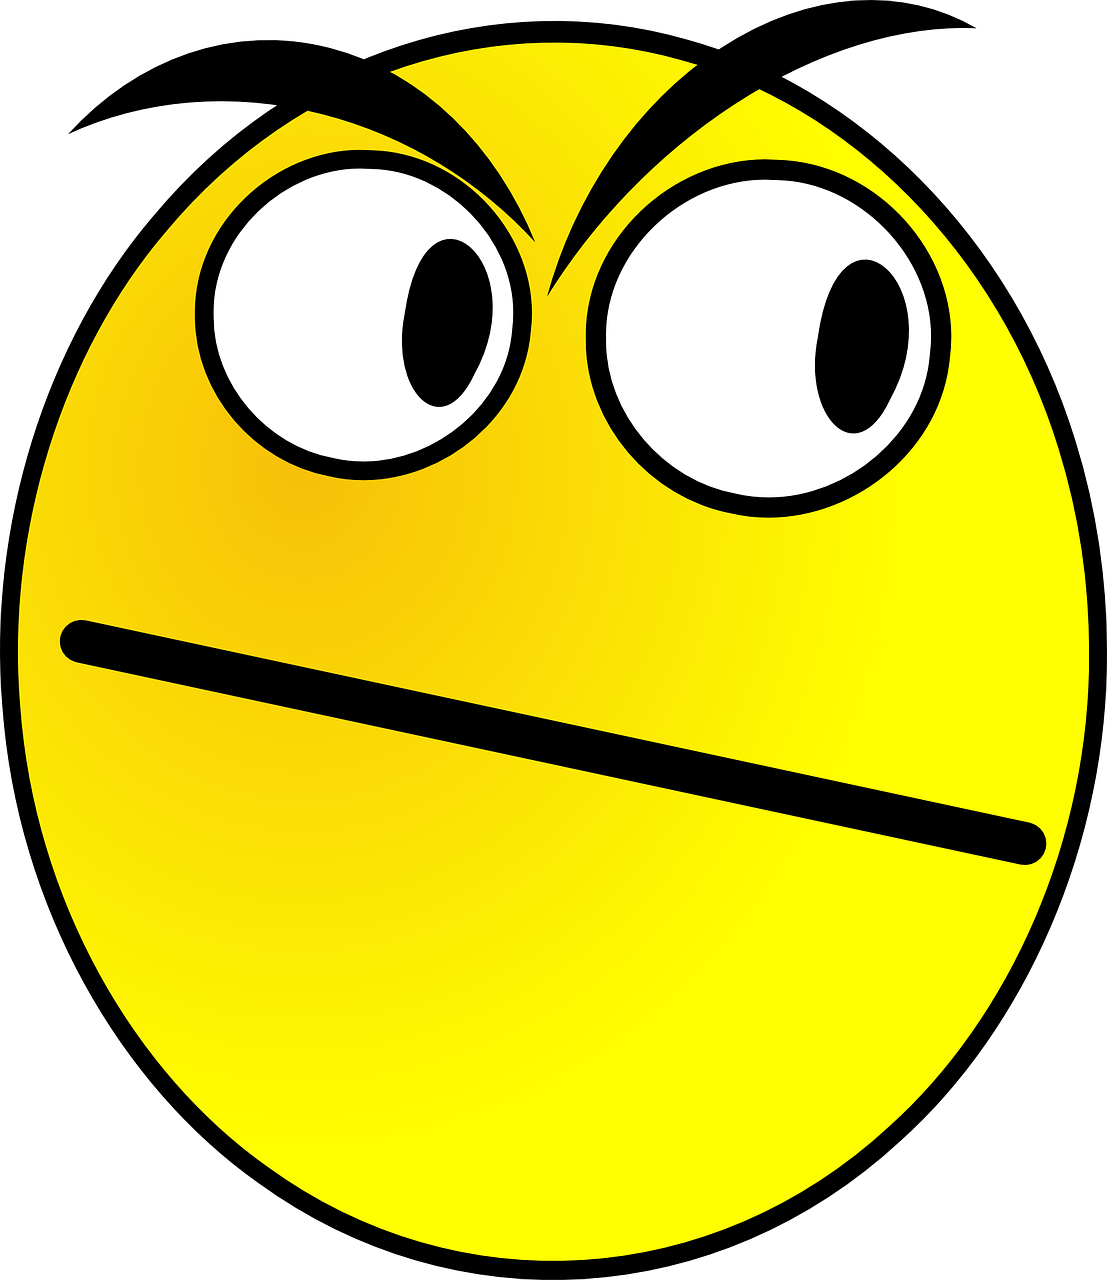 A Yellow Face With Black Background